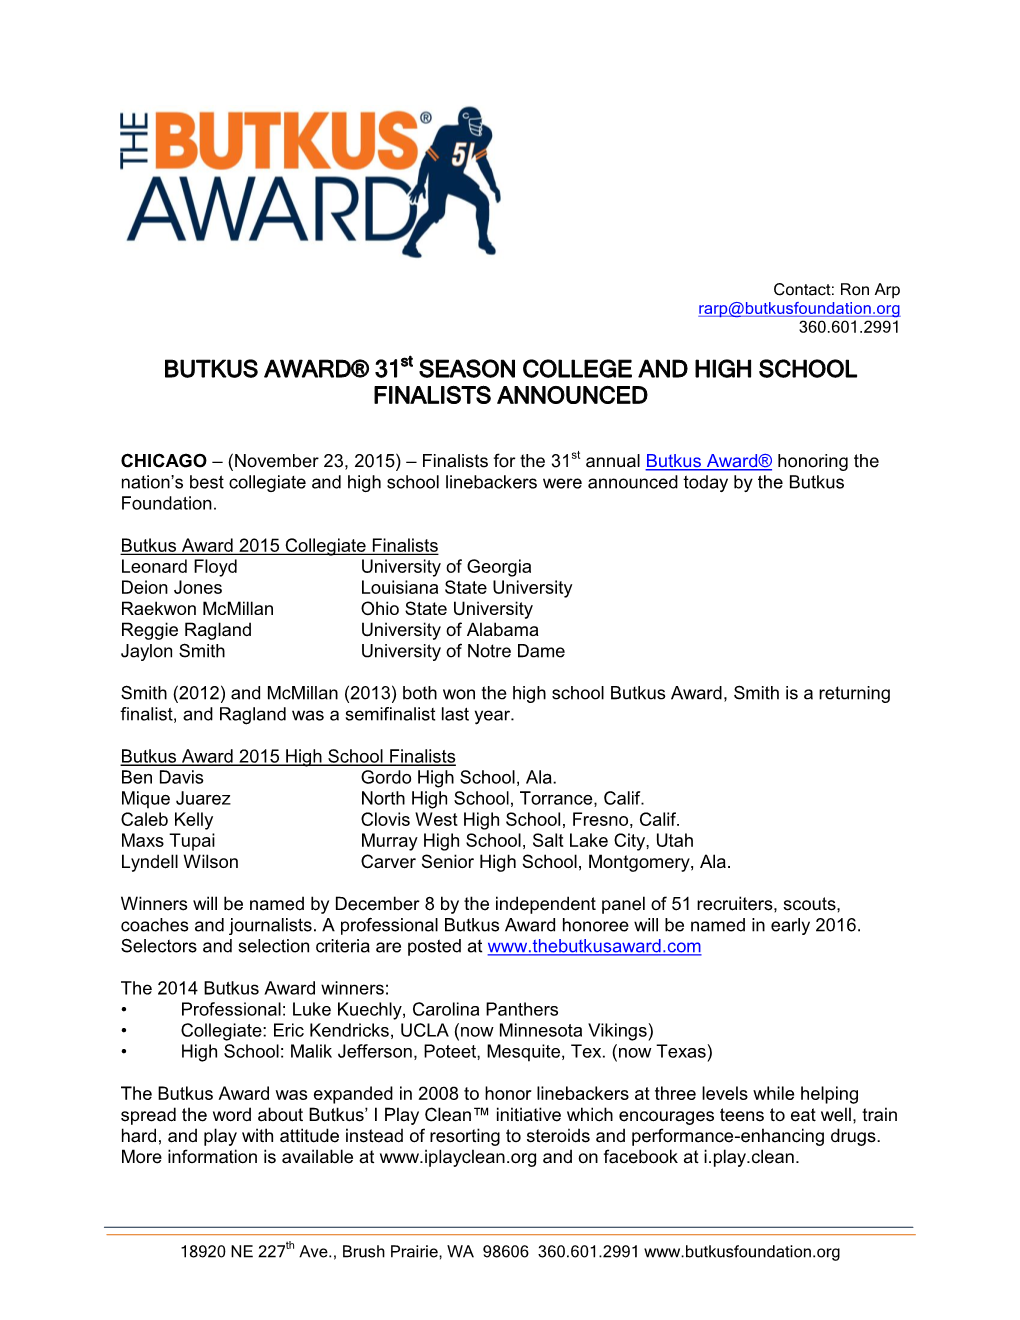 BUTKUS AWARD® 31St SEASON COLLEGE and HIGH SCHOOL FINALISTS ANNOUNCED